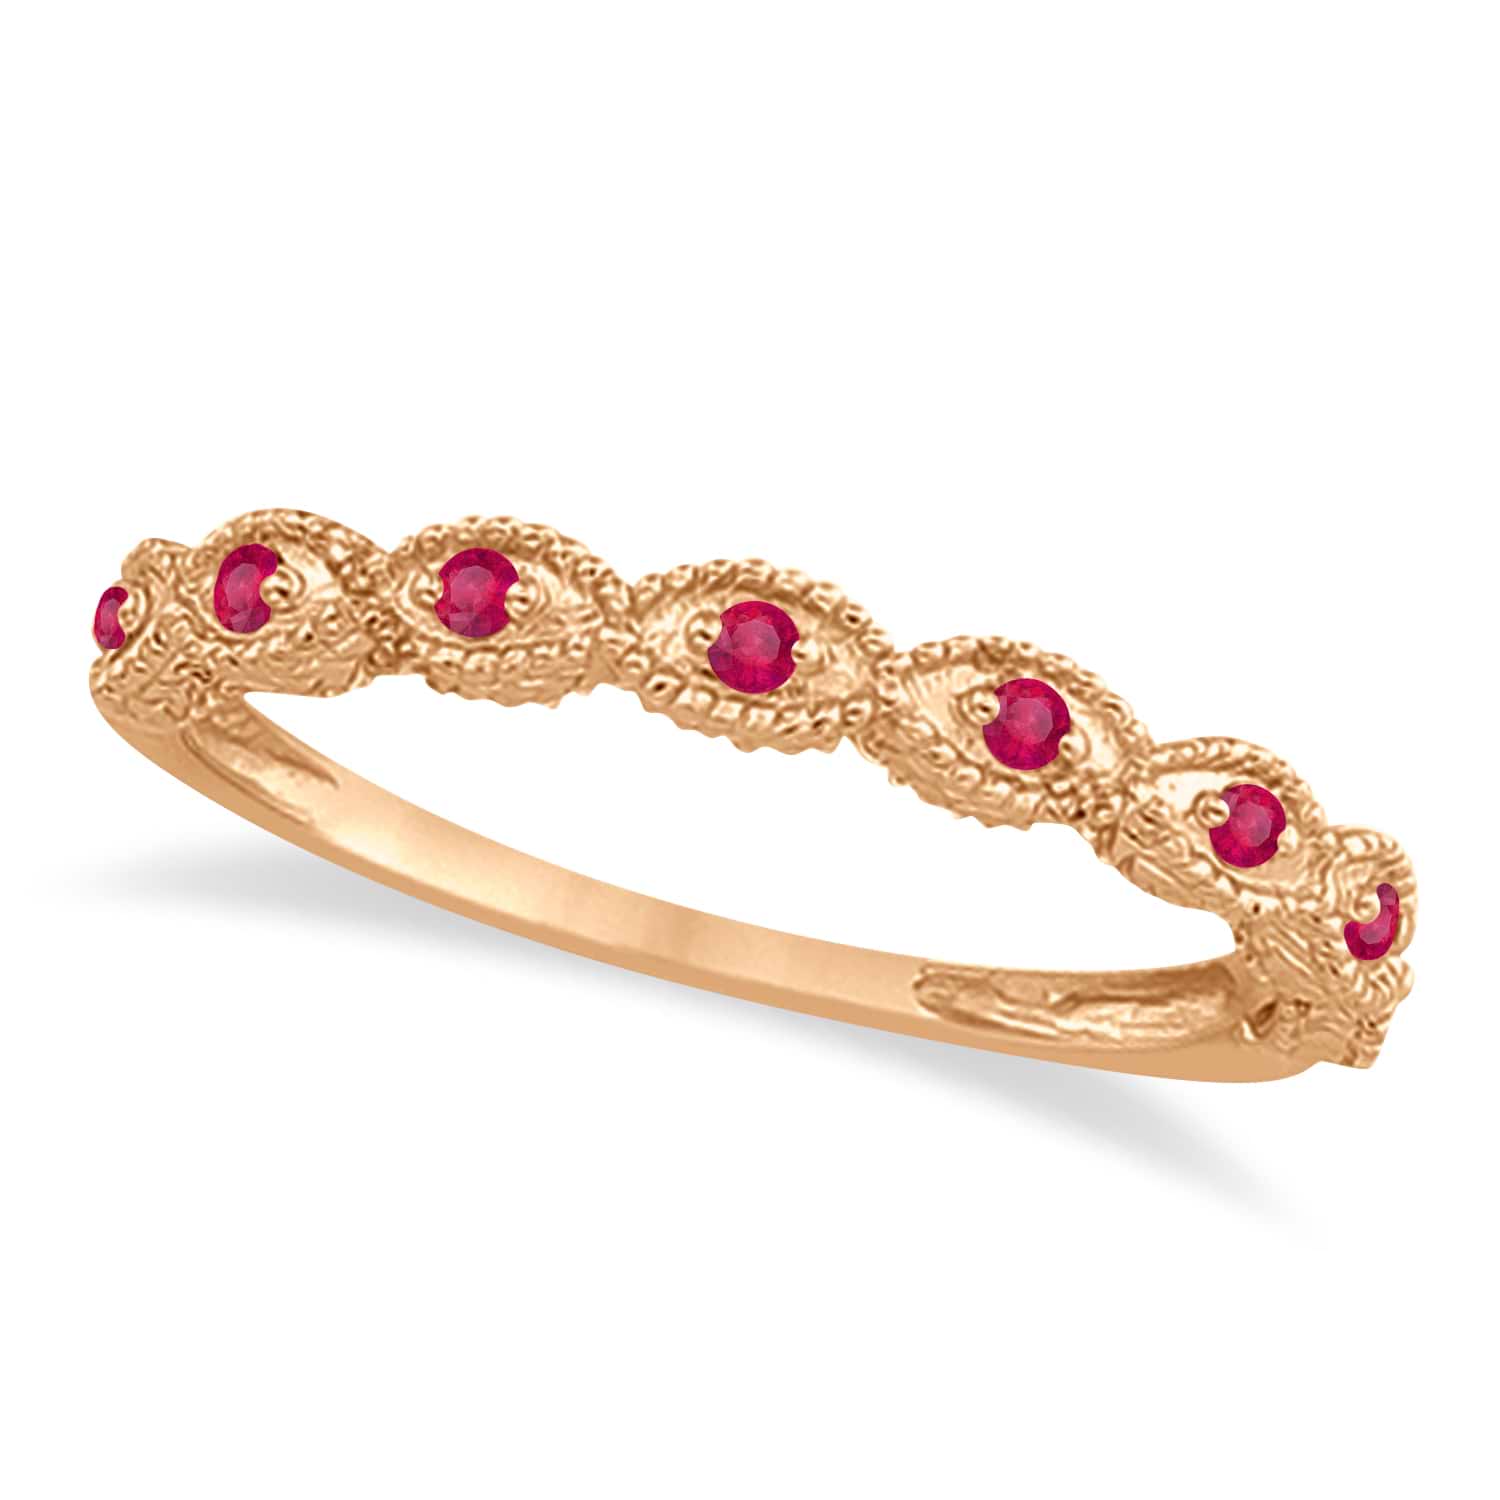 Antique Ruby Engagement Ring and Wedding Band 14k Rose Gold (0.36ct)